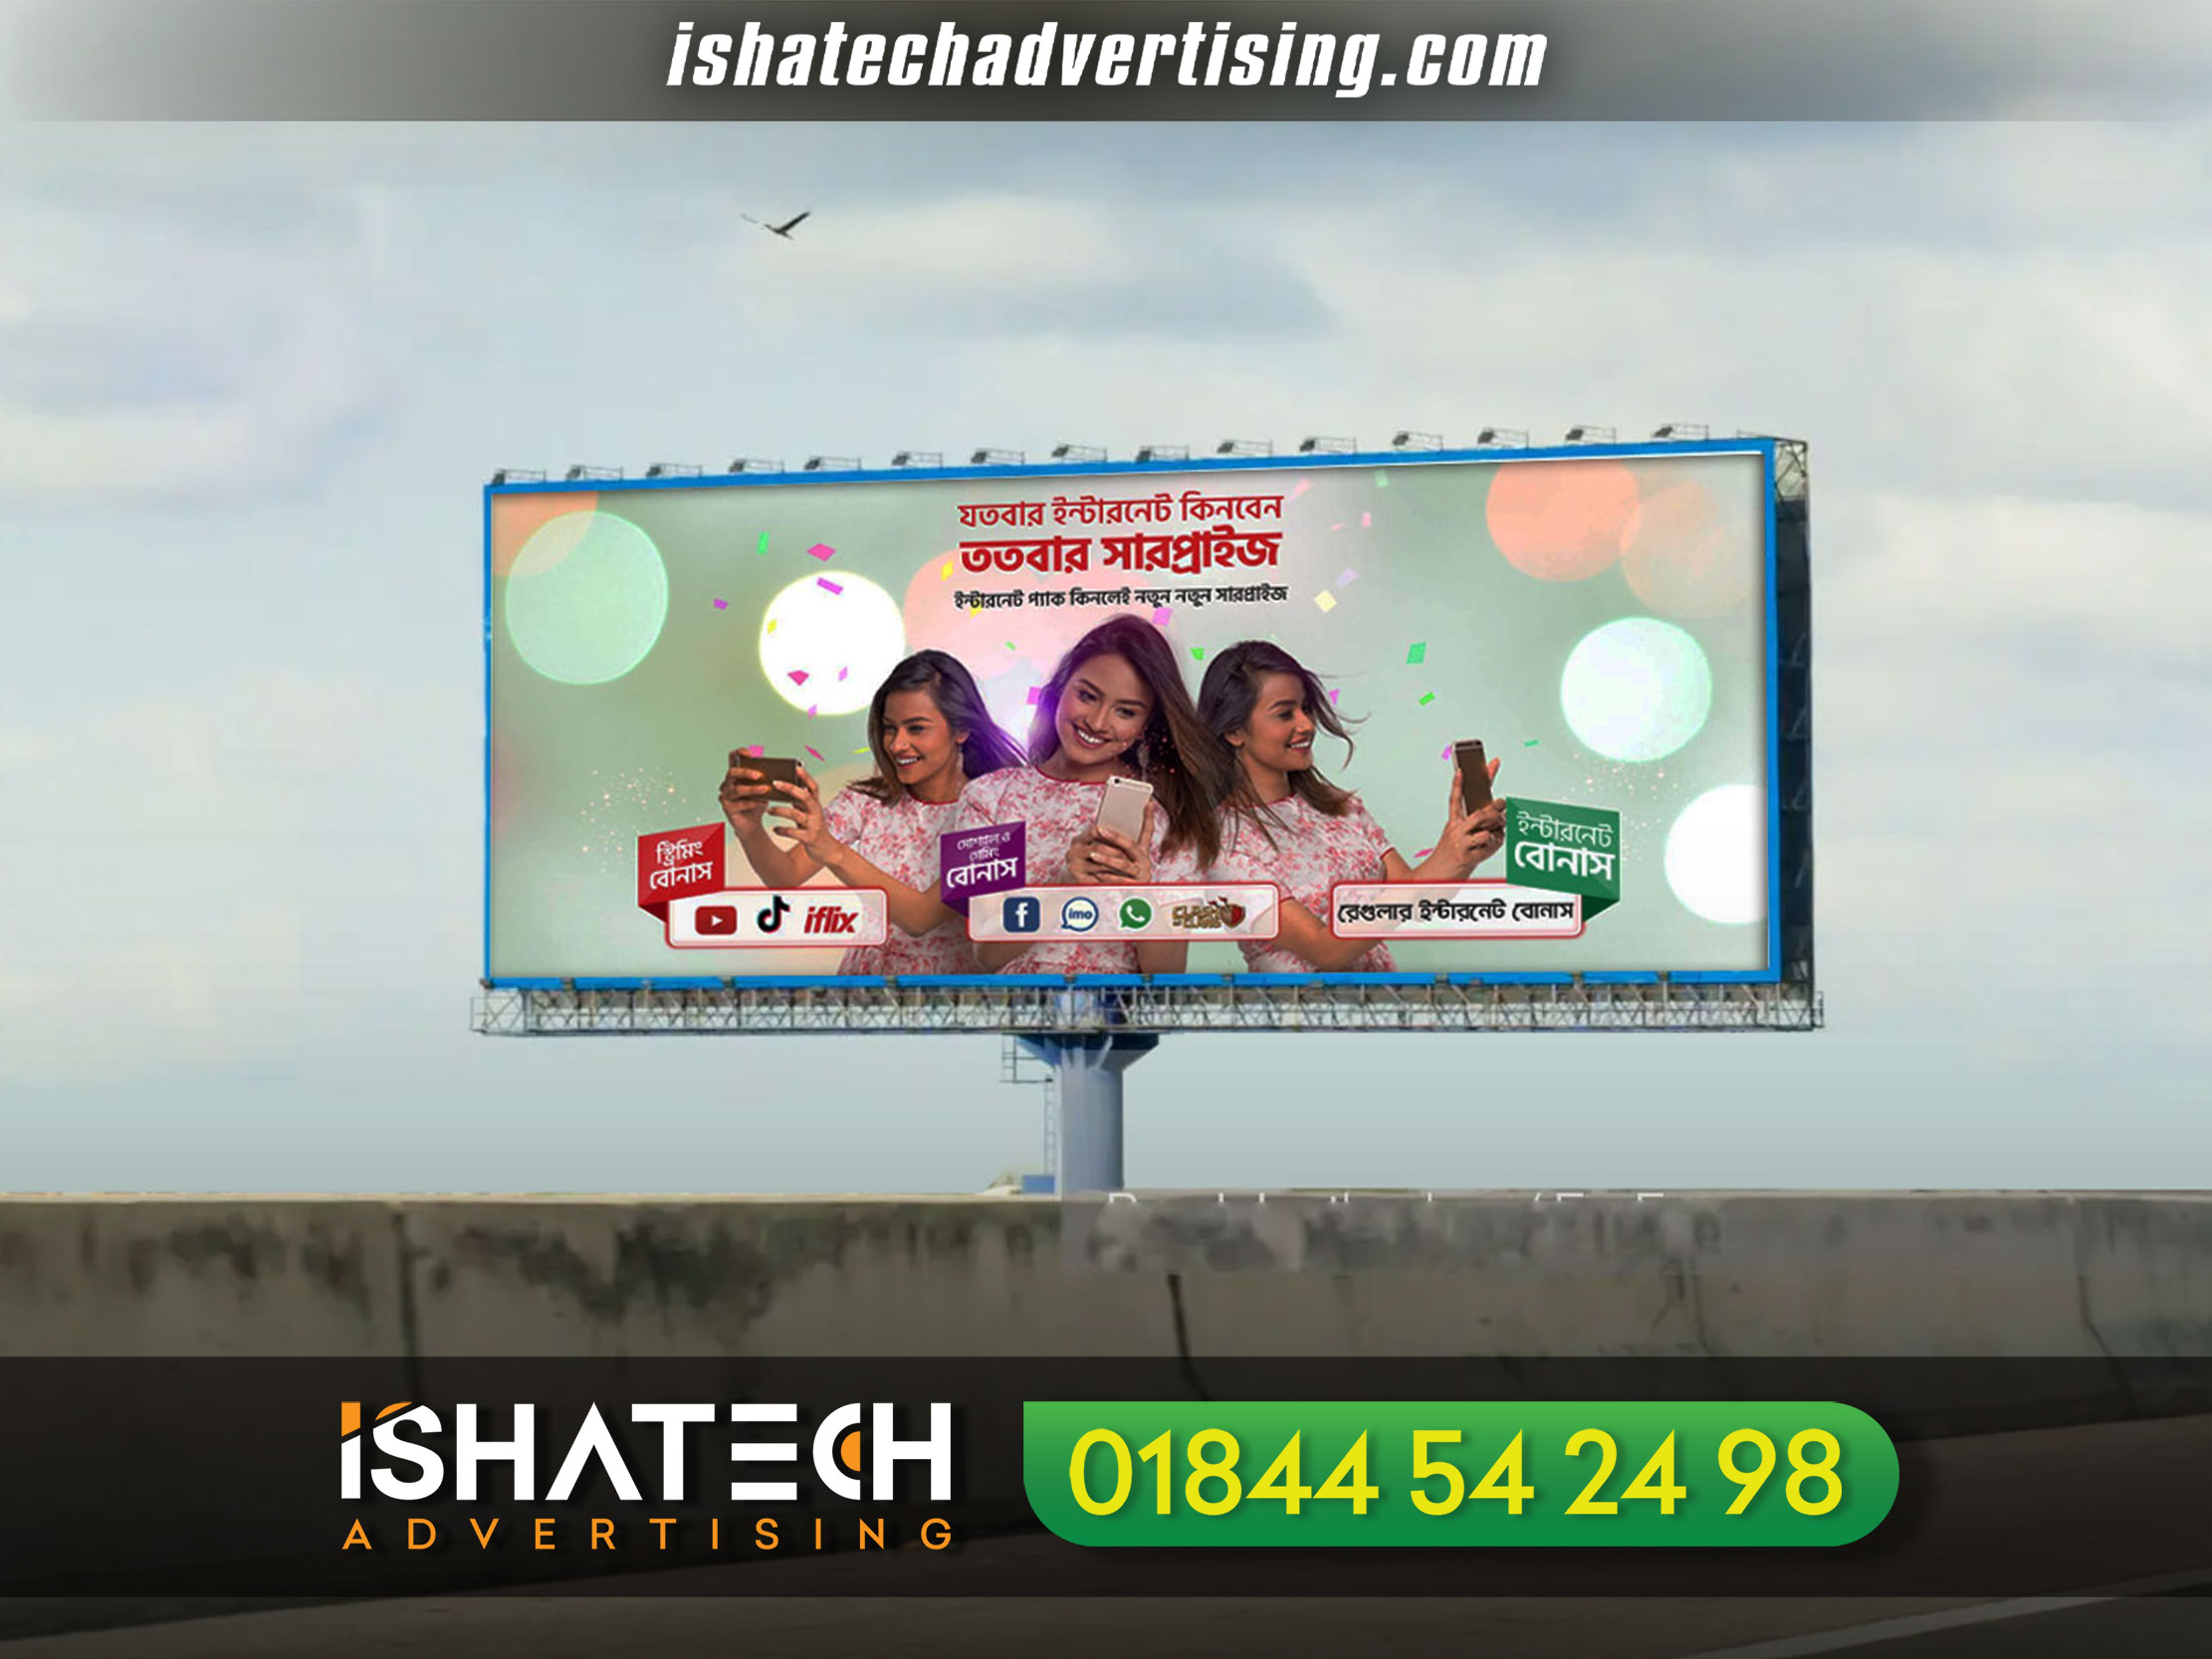 Road And Highway Billboard Making in Dhaka Bangladesh, Best Led Advertising in Dhaka Bangladesh, Led Billboard Making BD, Signboard Making BD, Officer Billboard BD, indoor billboard, Best Outdoor Billboard Making in Dhaka Bangladesh, Signboard BD, Best Domain Hosting Company in Dhaka, it Advertising Billboard, Billboard BD, Phone Company Billboard, Sim Company Billboard, Billboard BD, Billboard Ads Pro, Premier Cement Billboard Design, Real Estate Billboard, Project Billboard Advertising Steel Billboard Structure Steel Board Outdoor Signage, All Kind of #DigitalPrint Pana, PVC, Shop Sign, Name Plate, #Lighting Sign Board, #LEDSign, Neon Sign, Acrylic Sign, Moving Display, #Billboard, Radio Ad, #NewspaperAd, TV Ad, #FairStall & Event #Management Ad Etc. Hope You’re Interest! #neonsign #signboard #eventmanagement #signage #stall #digitalprint #sign #display #board #acrylic #neon #plate #ledsign #lighting #printing #graphicdesign #service #marketing #ad #branding #print #advertising #BillBoard #DigitalBoard #SteelBoard #LocalBoard #StandBoardNonlitBoard #Structure #Structural. top billboard advertising agency in dhaka bangladesh. top 10 billboard advertising agency in dhaka bangladesh. list of billboard advertising agency in dhaka bangladesh. billboard advertising agency in dhaka bangladesh price. best billboard advertising agency in dhaka bangladesh. billboard advertising cost in bangladesh. billboard advertising bd. billboard rent in dhaka. real estate billboard, project billboard making in Dhaka Bangladesh, Besl Led Billboard Making Company in Dhaka Bangladesh.